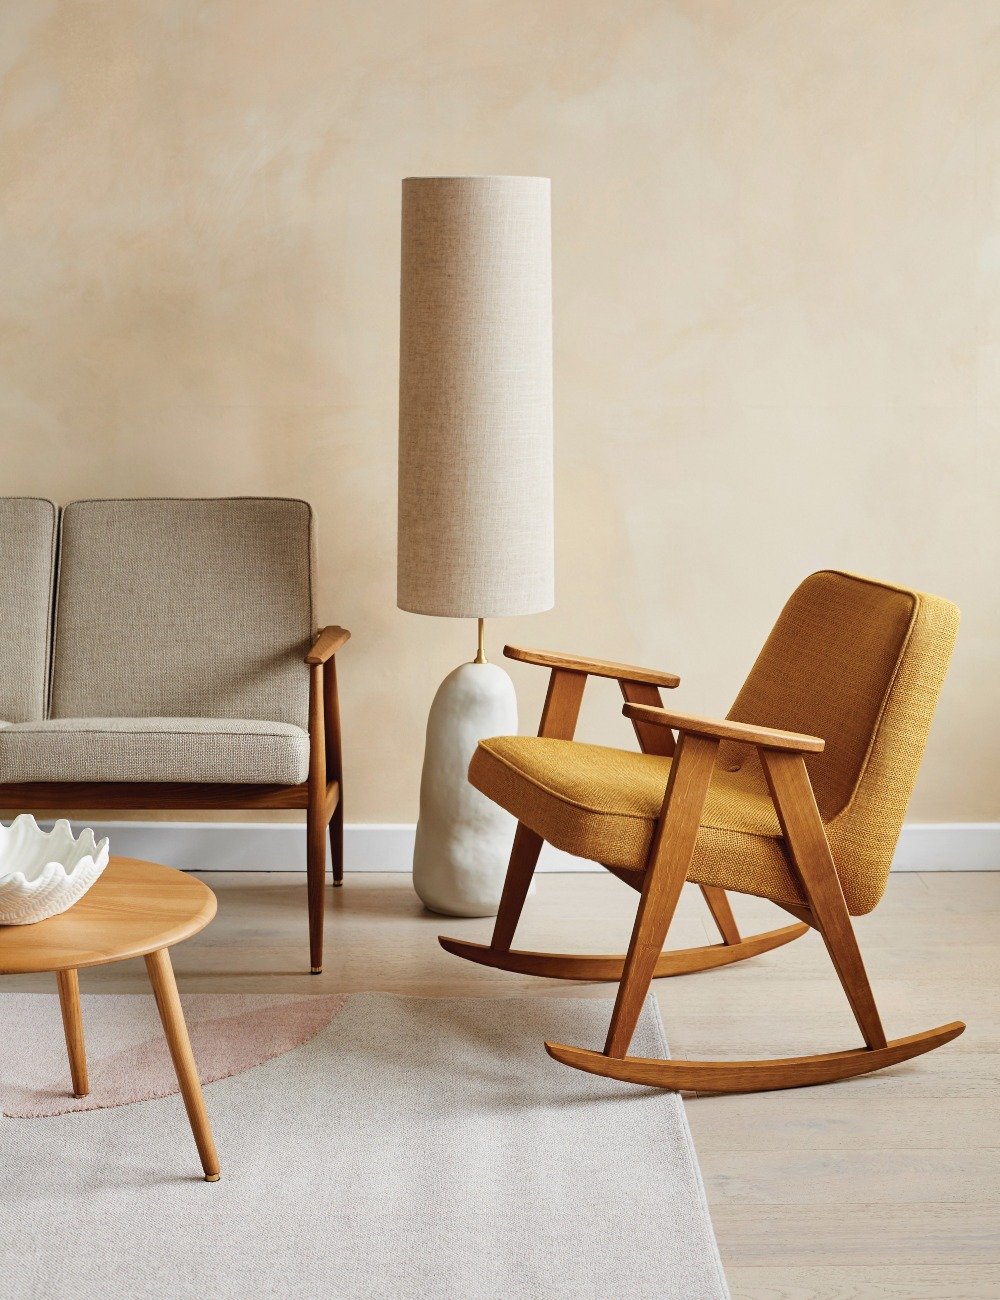 The Mid-Century Collection